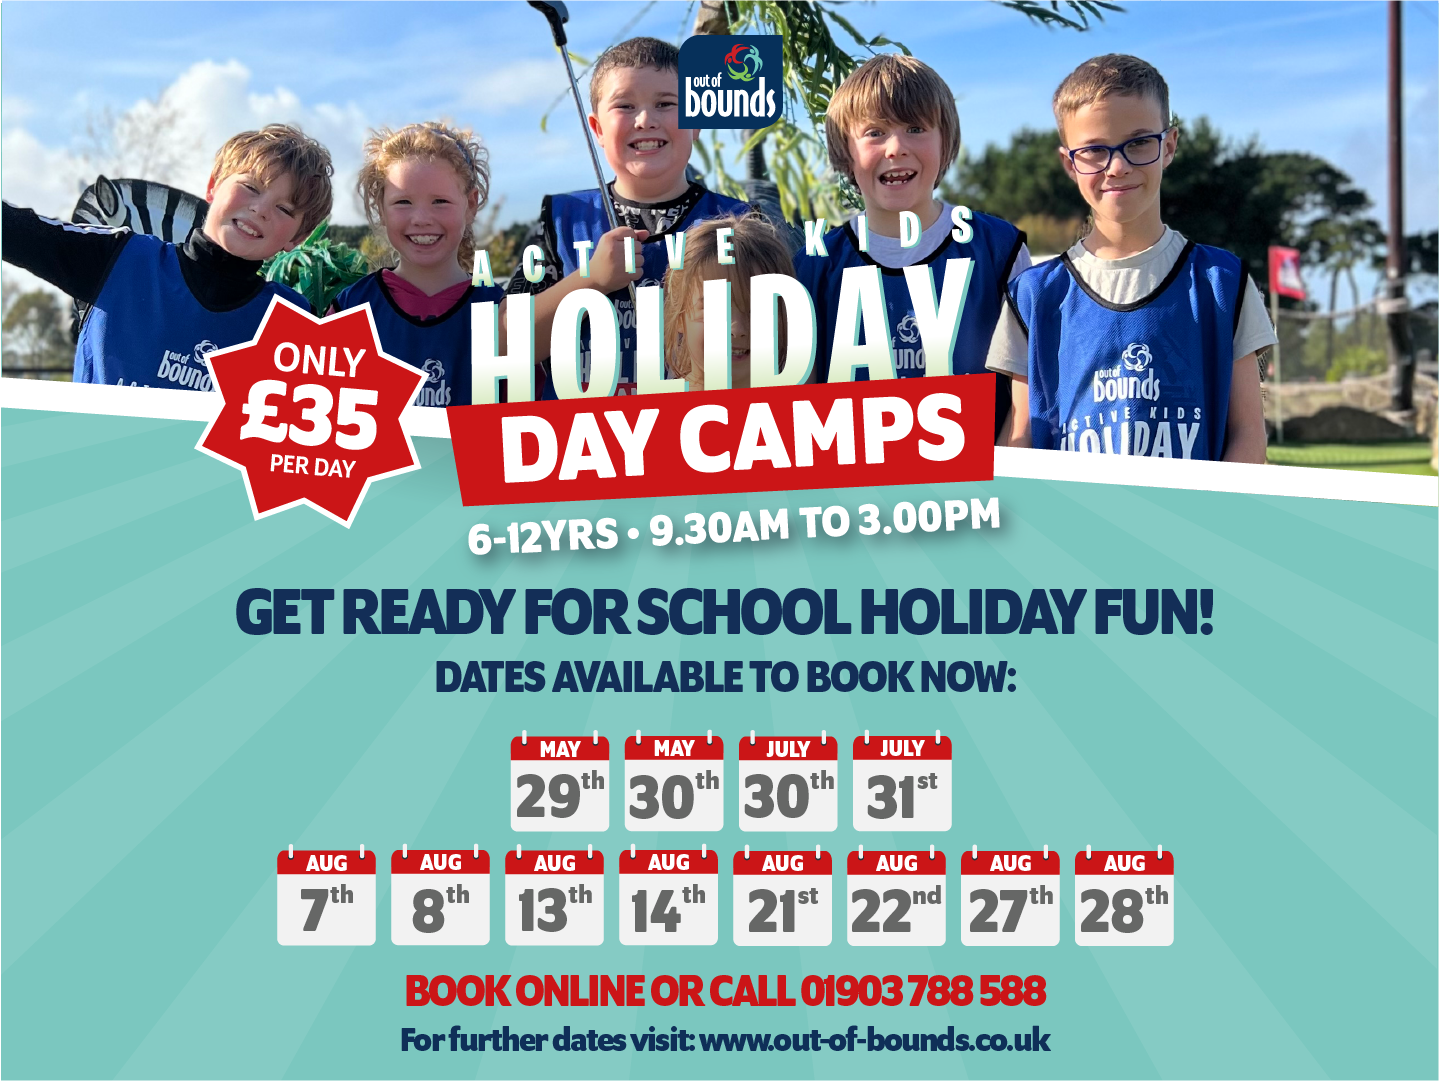 ACTIVE KIDS HOLIDAY DAY CAMPS